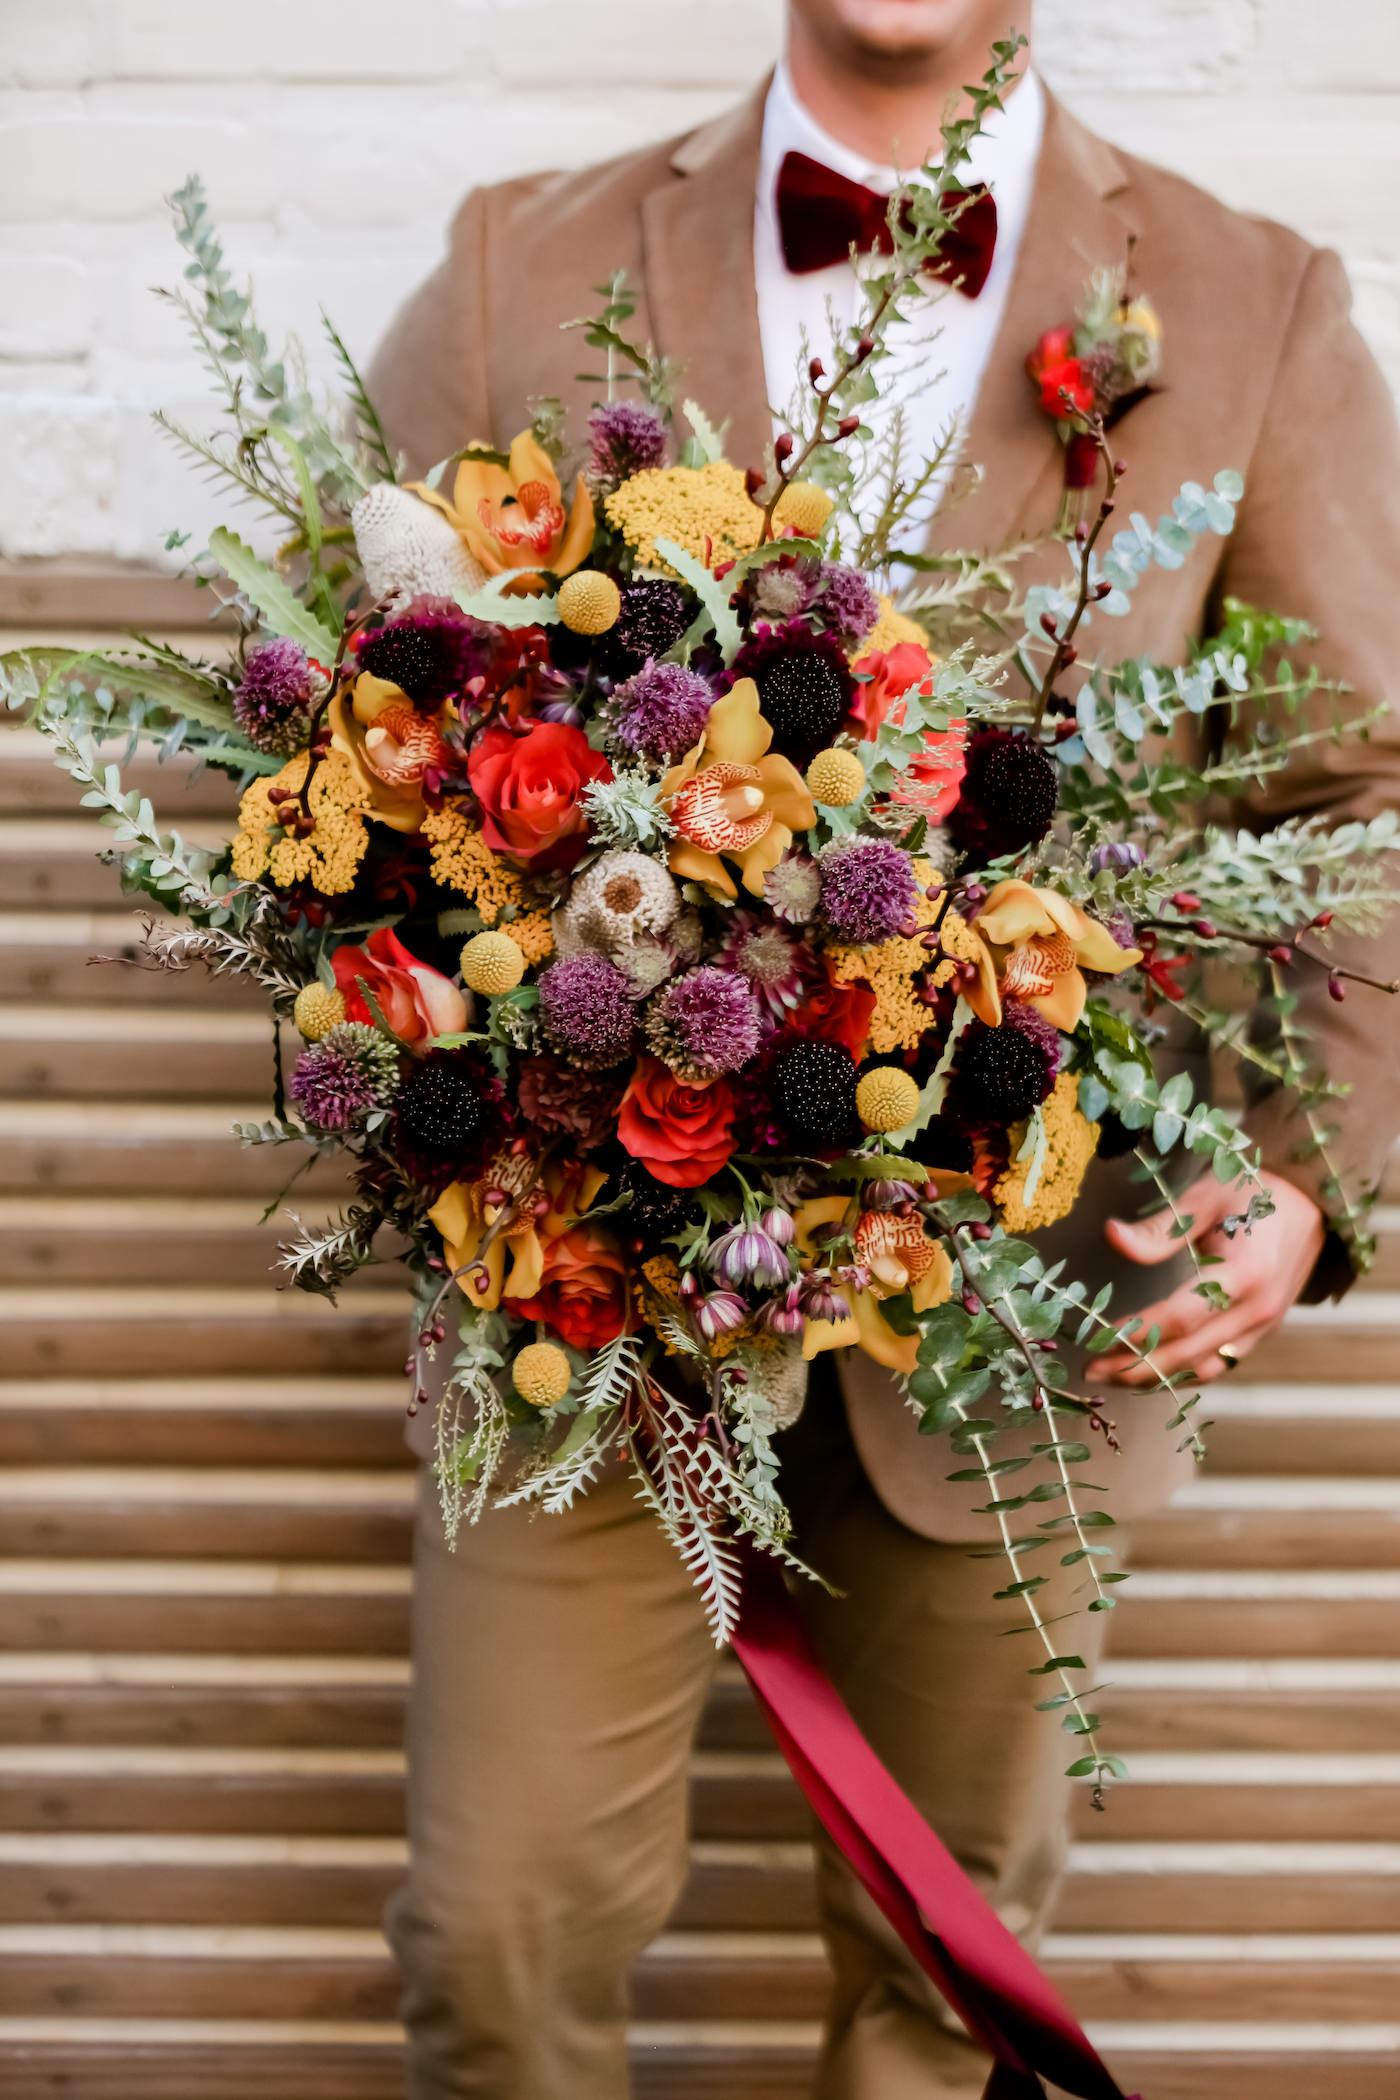 Vintage Bohemian Inspired Florida Wedding Bouquet, Textured Flowers with Orange, Purple, Yellow, Red, Eggplant and Ivory Floral Stems, Thistle, Roses, Groom Wearing Neutral Tone Brown Boho Suit with Velvet Bow Tie | Tampa Bay Wedding Planner Blue Skies Weddings and Events | Downtown St. Petersburg Wedding Photographer Lifelong Photography Studio